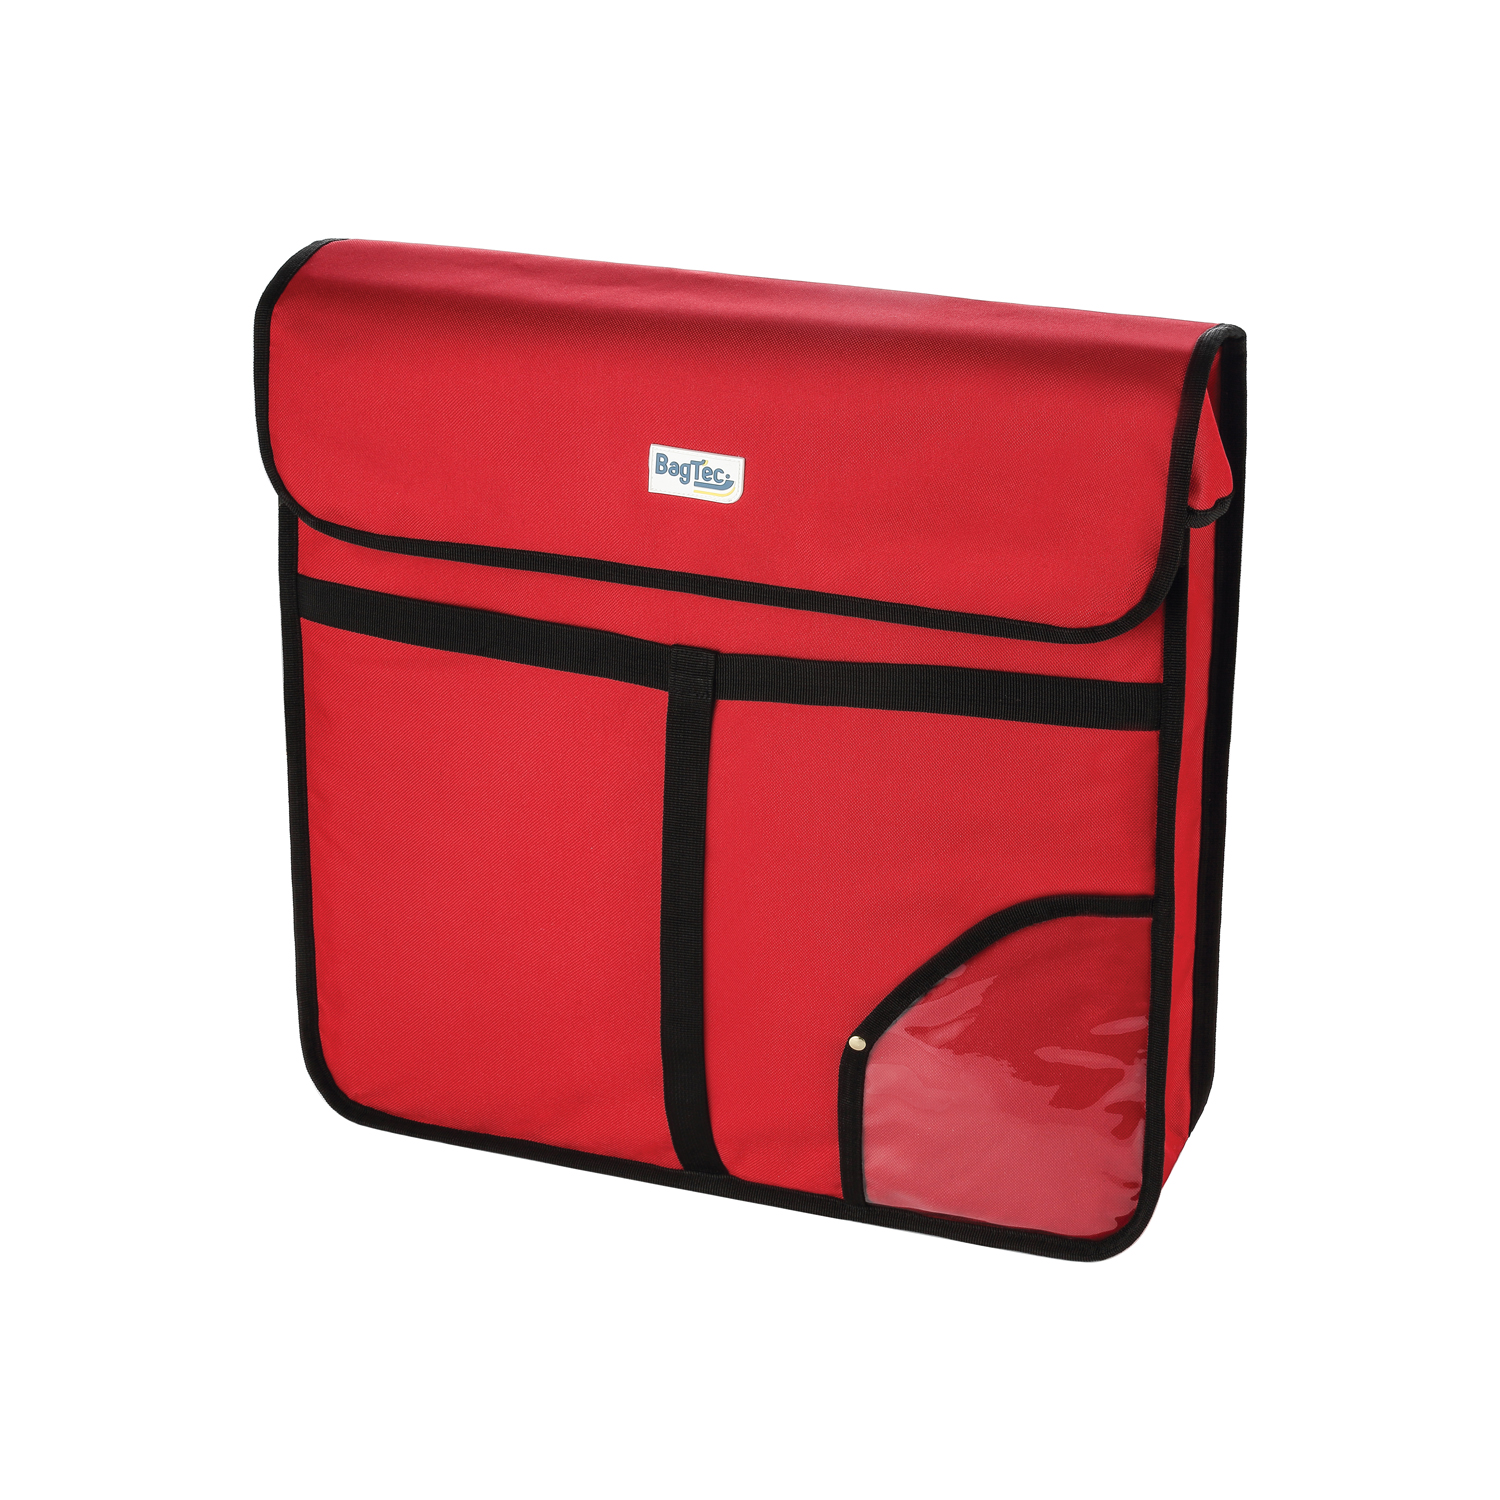 CAC China BTPZ-0520R BagTec Red Pizza Delivery Bag 20" x 20" x 5"